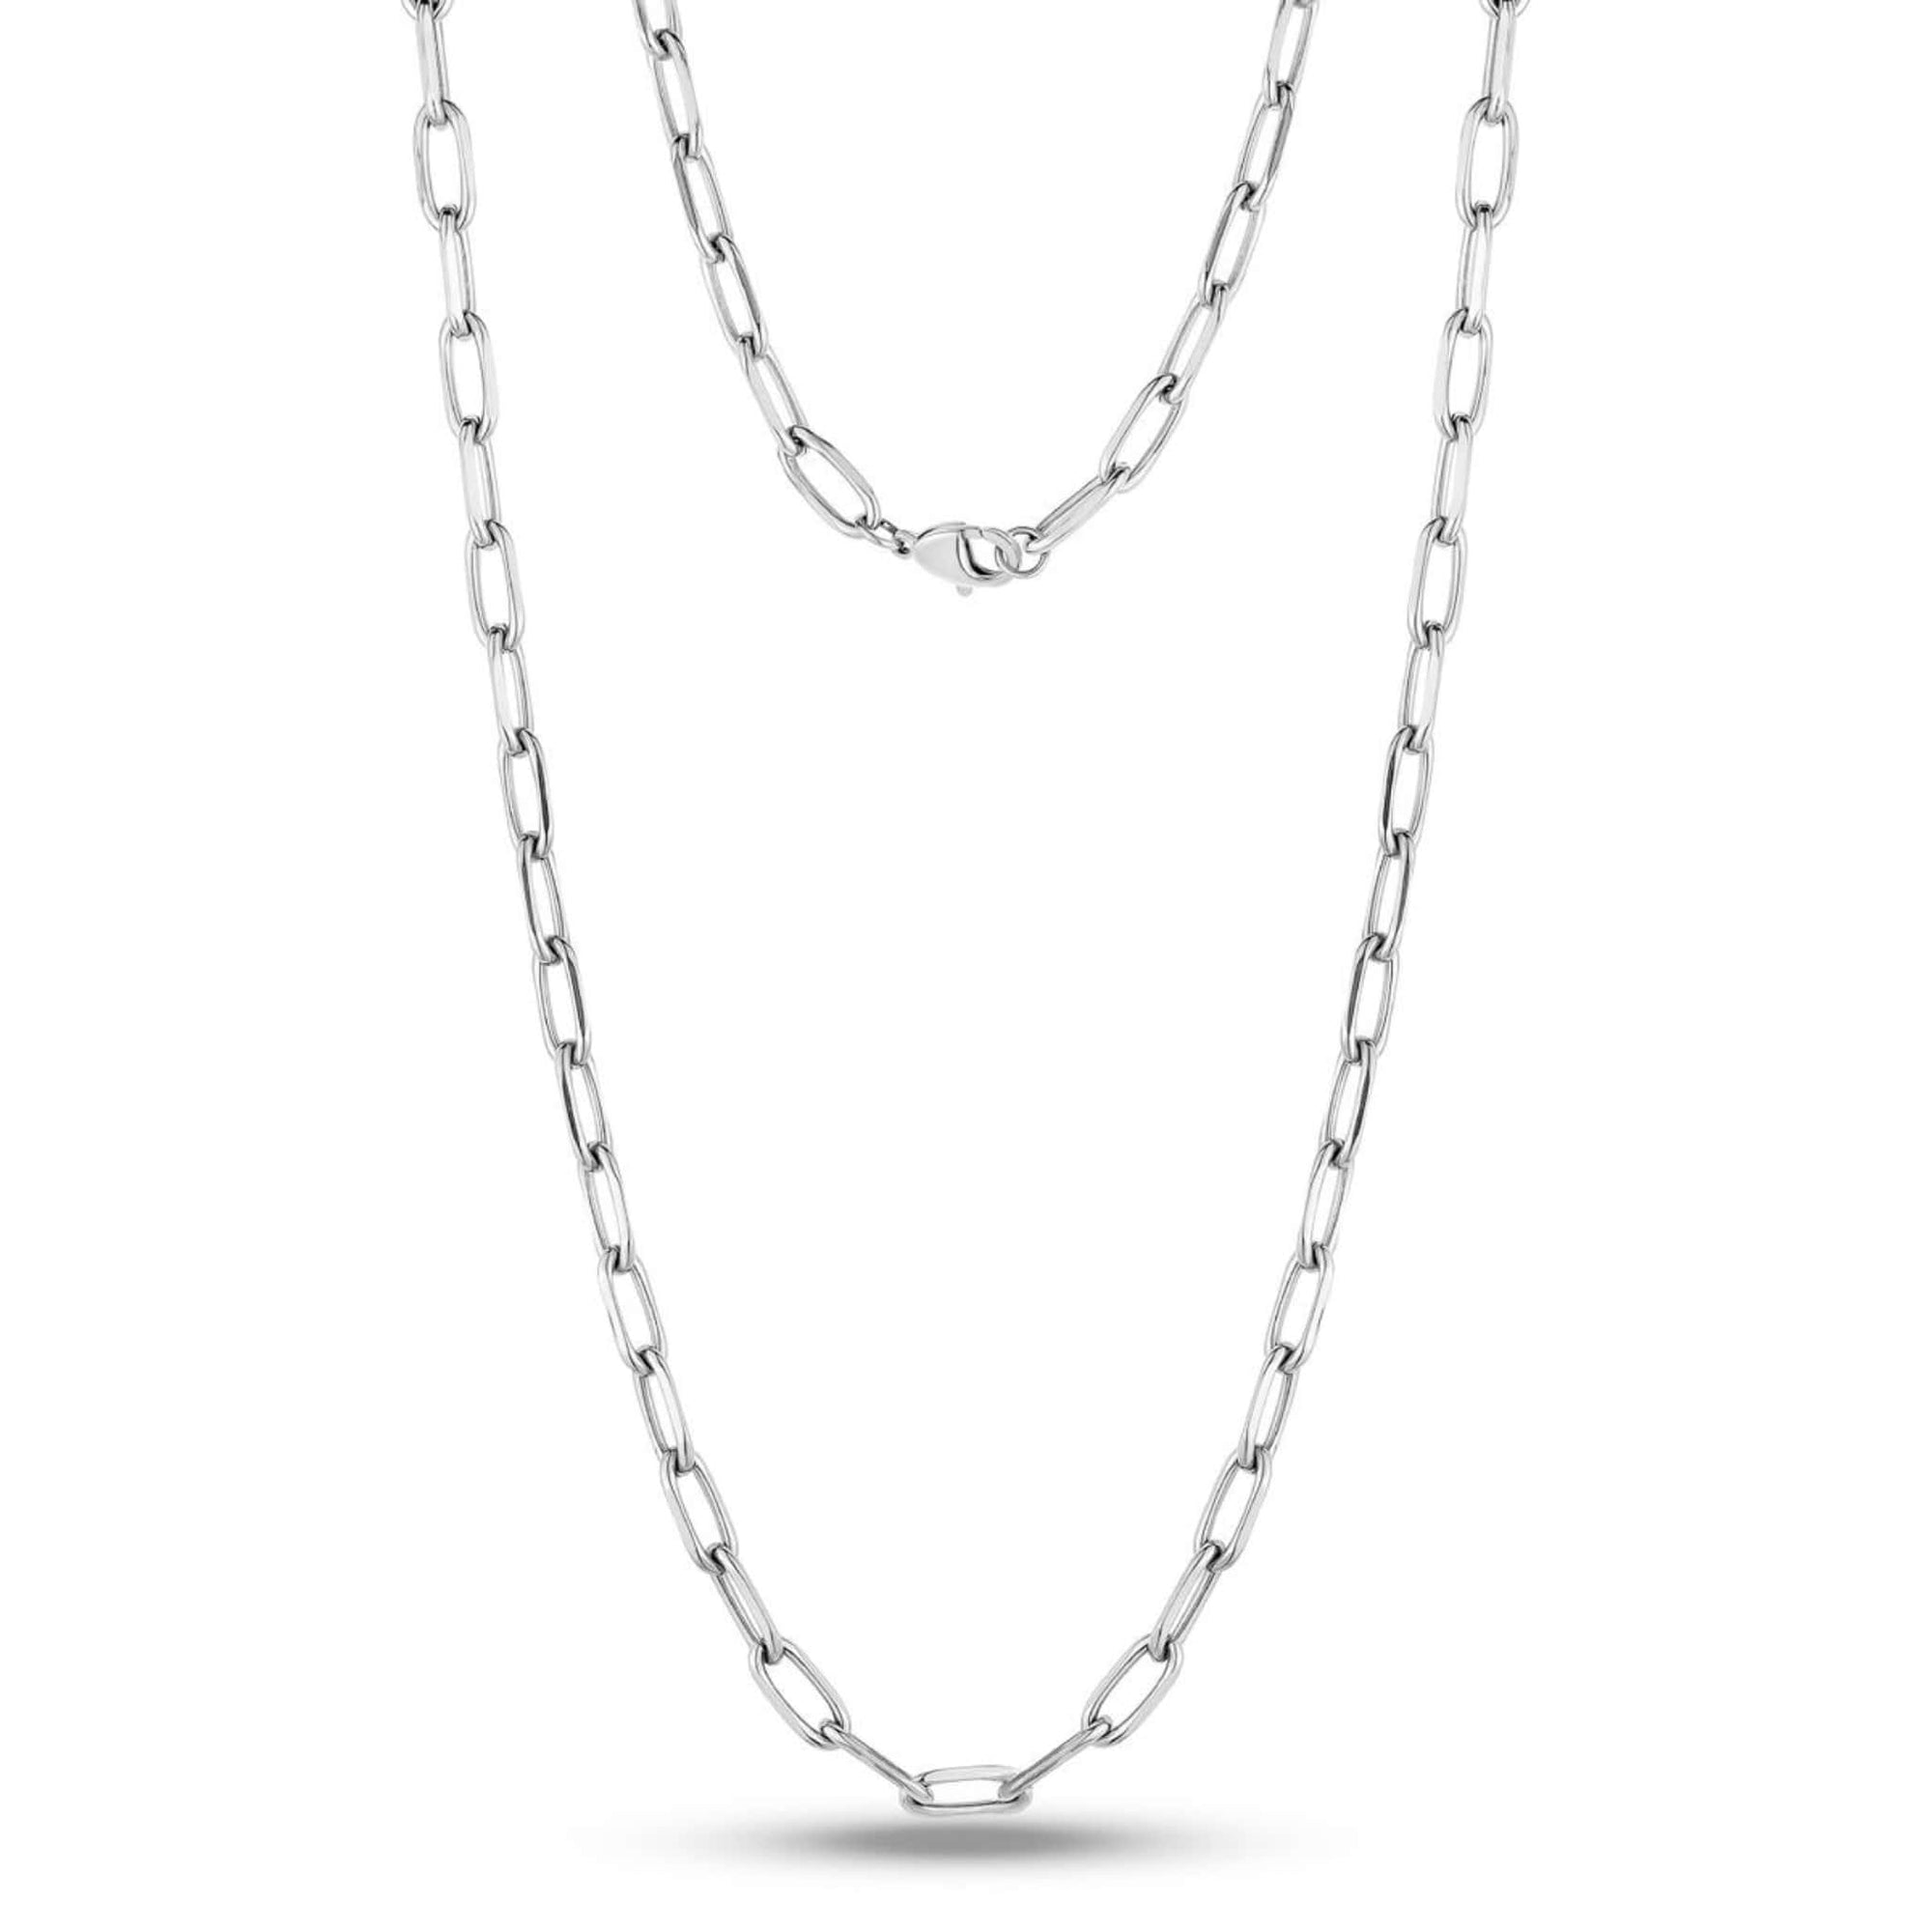 5mm Stainless Steel Paper Clip Necklace at Arman's Jewellers